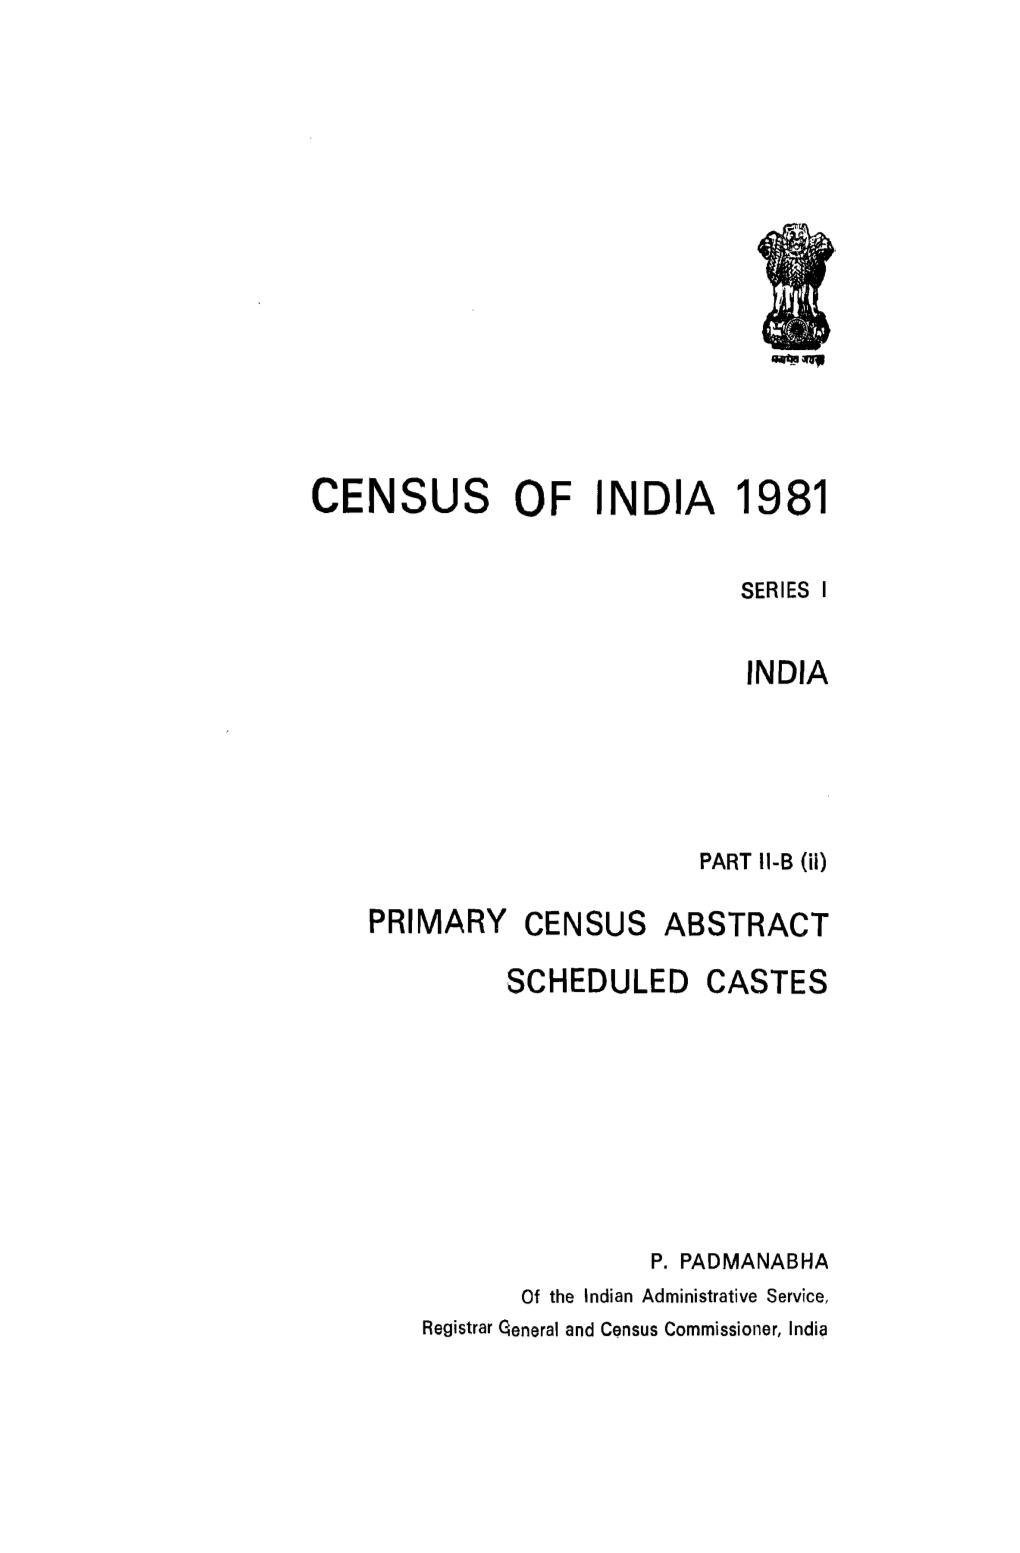 Primary Census Abstract, Scheduled Castes, Part II-B (Ii), Series 1, India